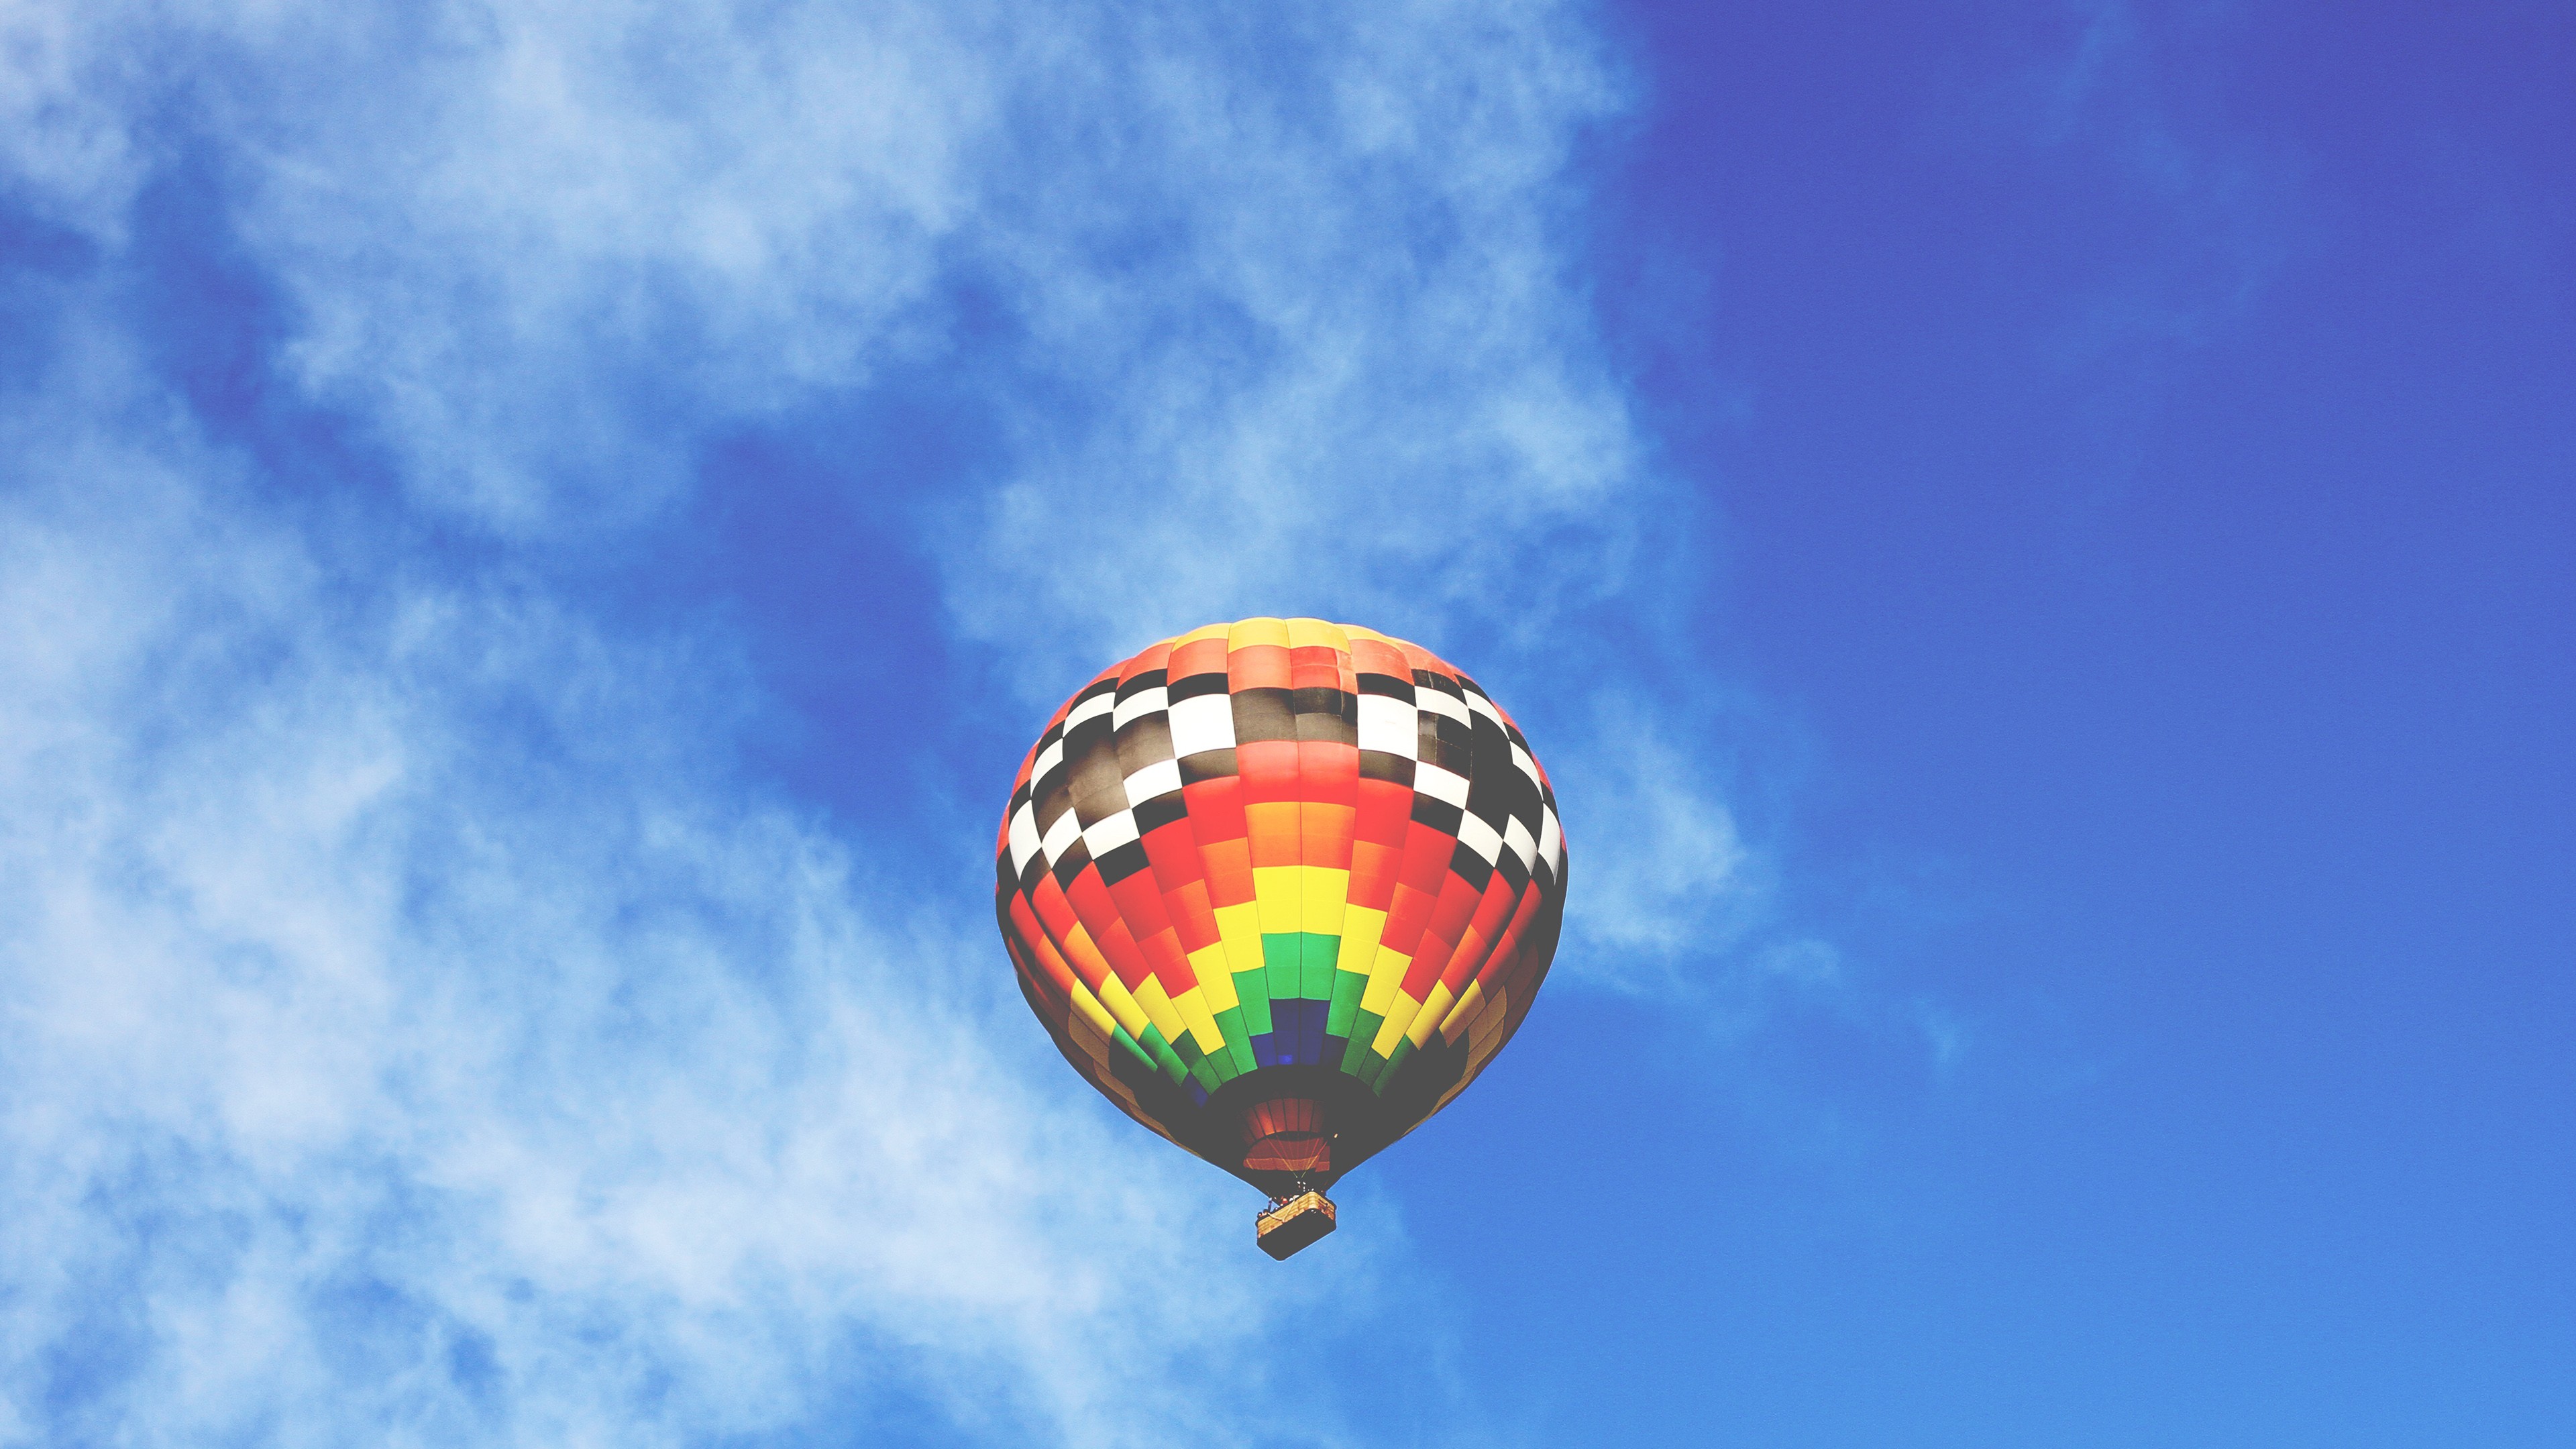 photography, Clear sky, Clouds, Hot air balloons Wallpaper